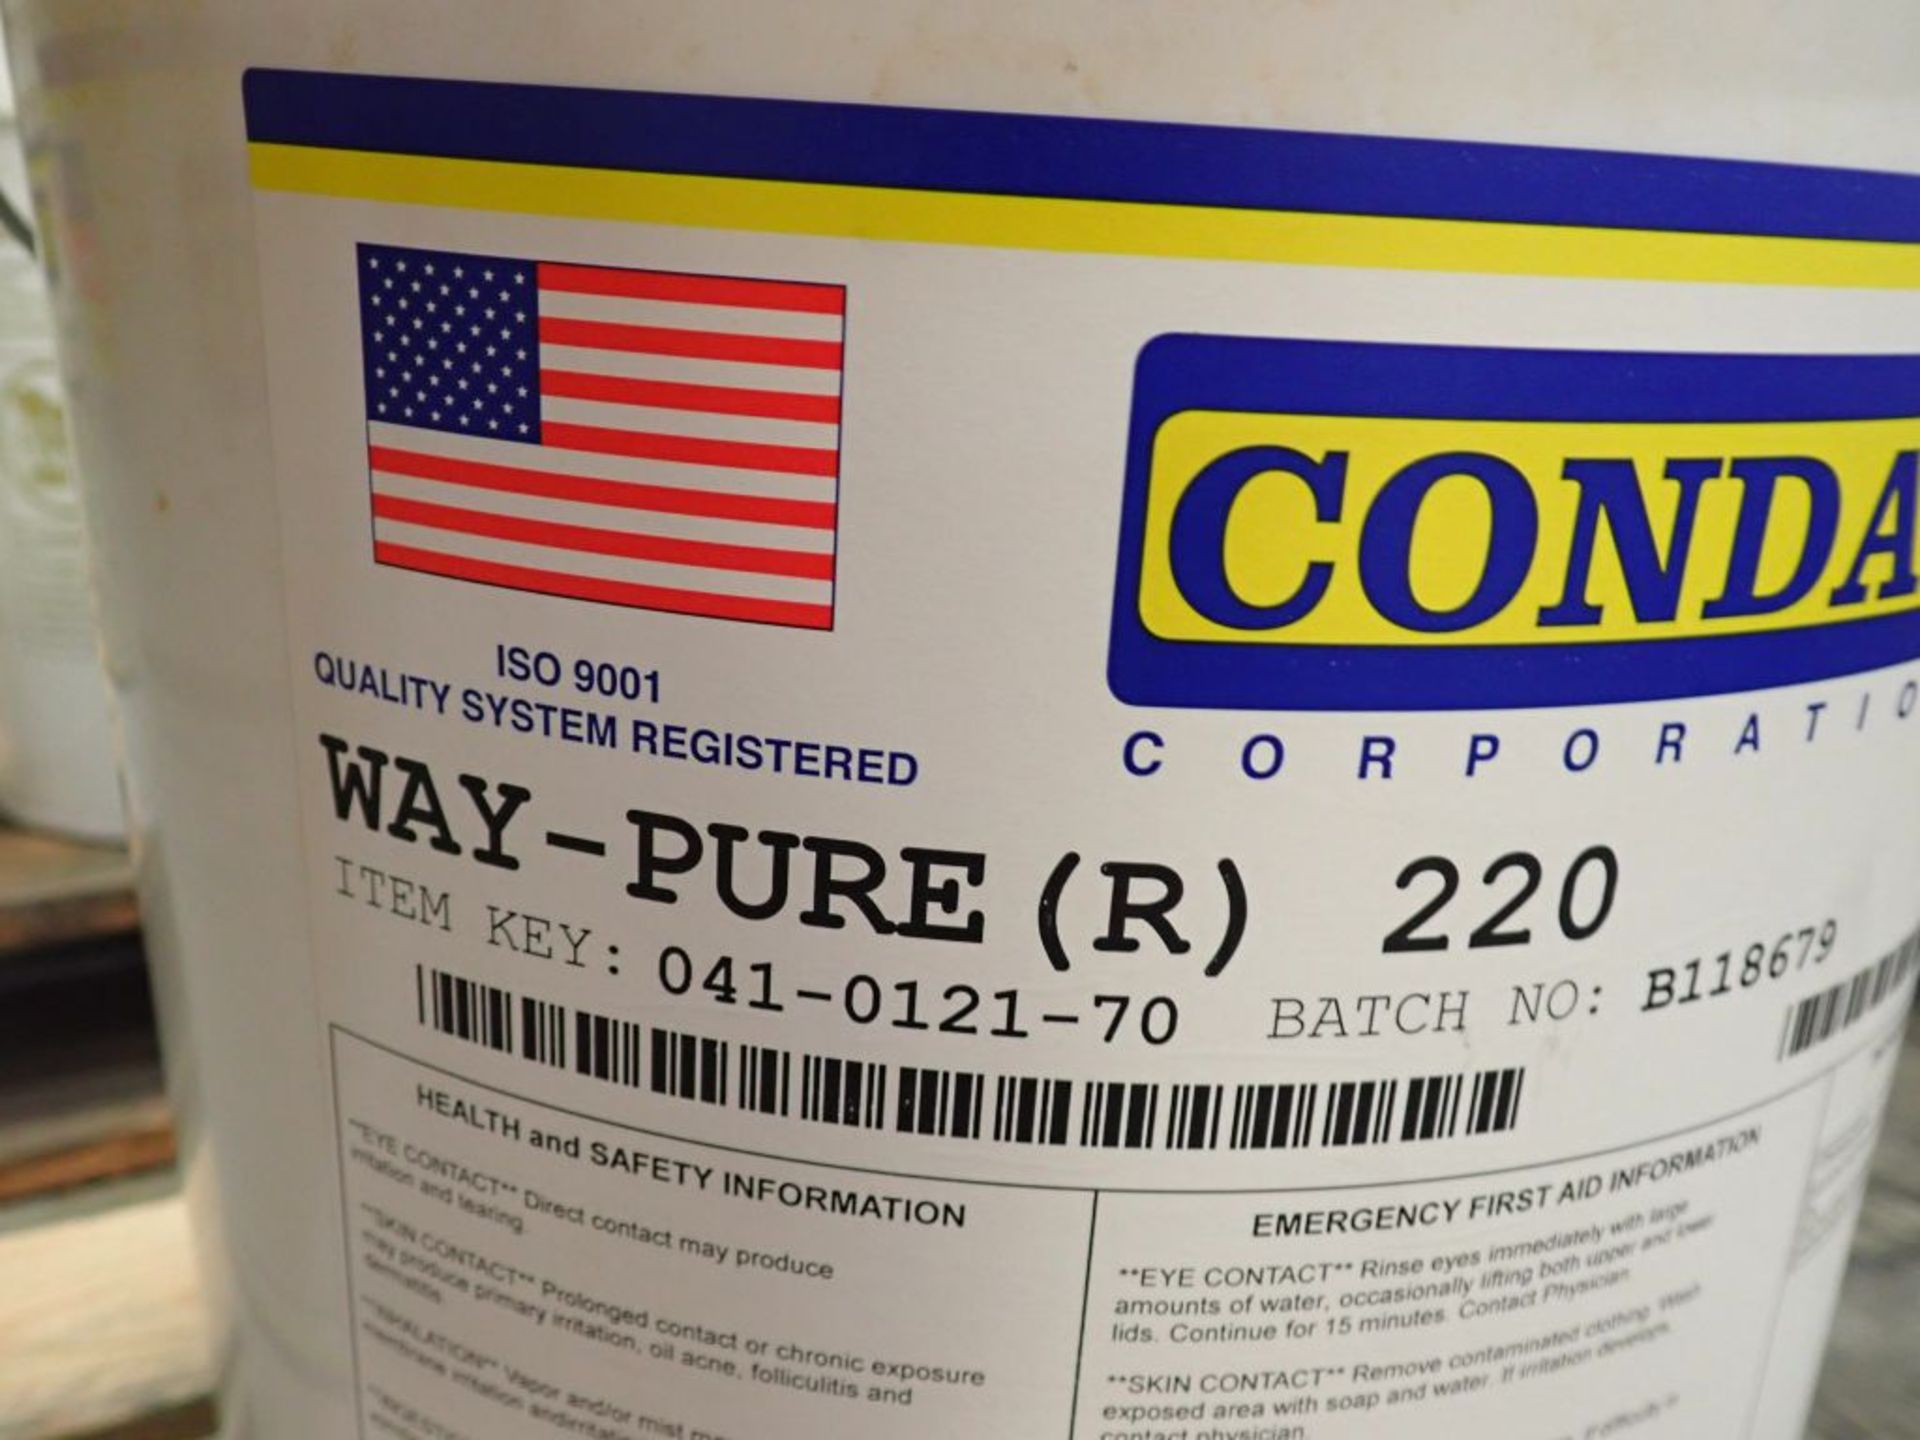 Lot of (4) Containers of 5-Gallon Condat Wire Lubricant | Item Key: 041-0191-70; New Surplus - Image 11 of 12